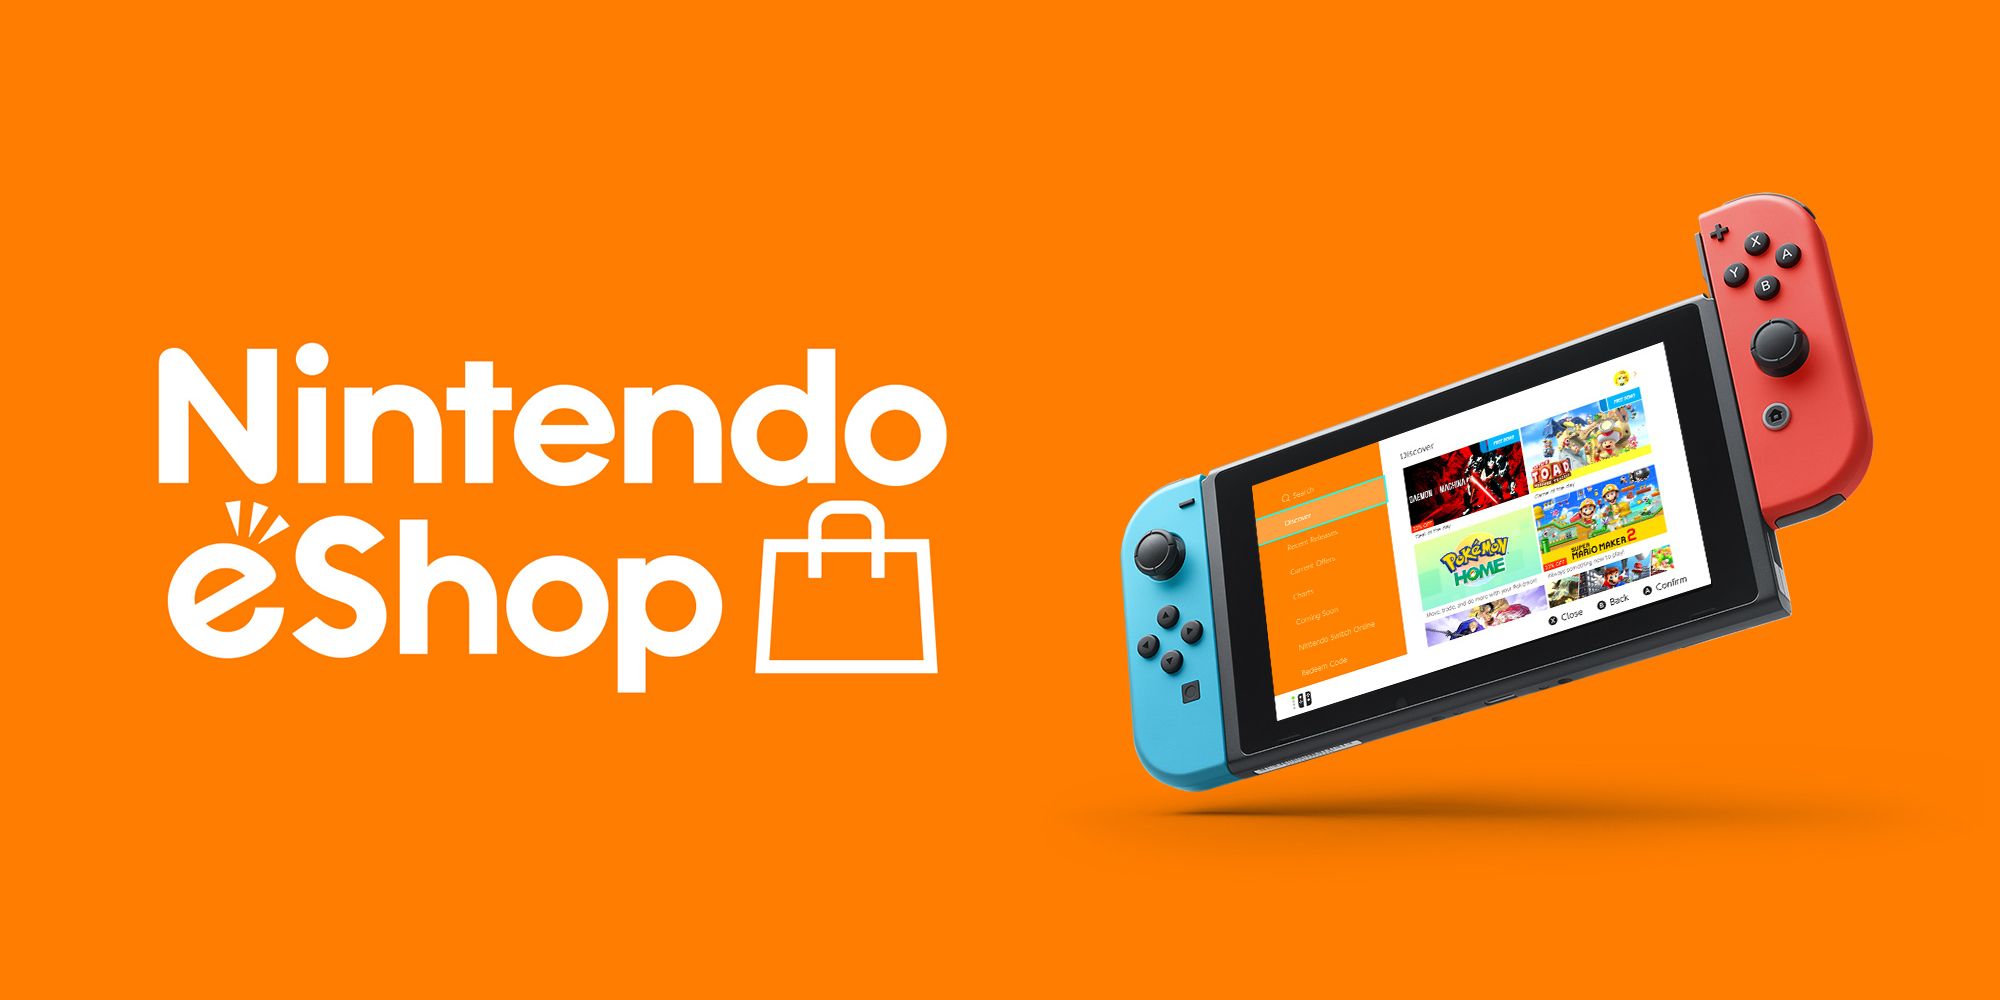 Nintendo Switch eShop is Currently Experiencing Network Errors